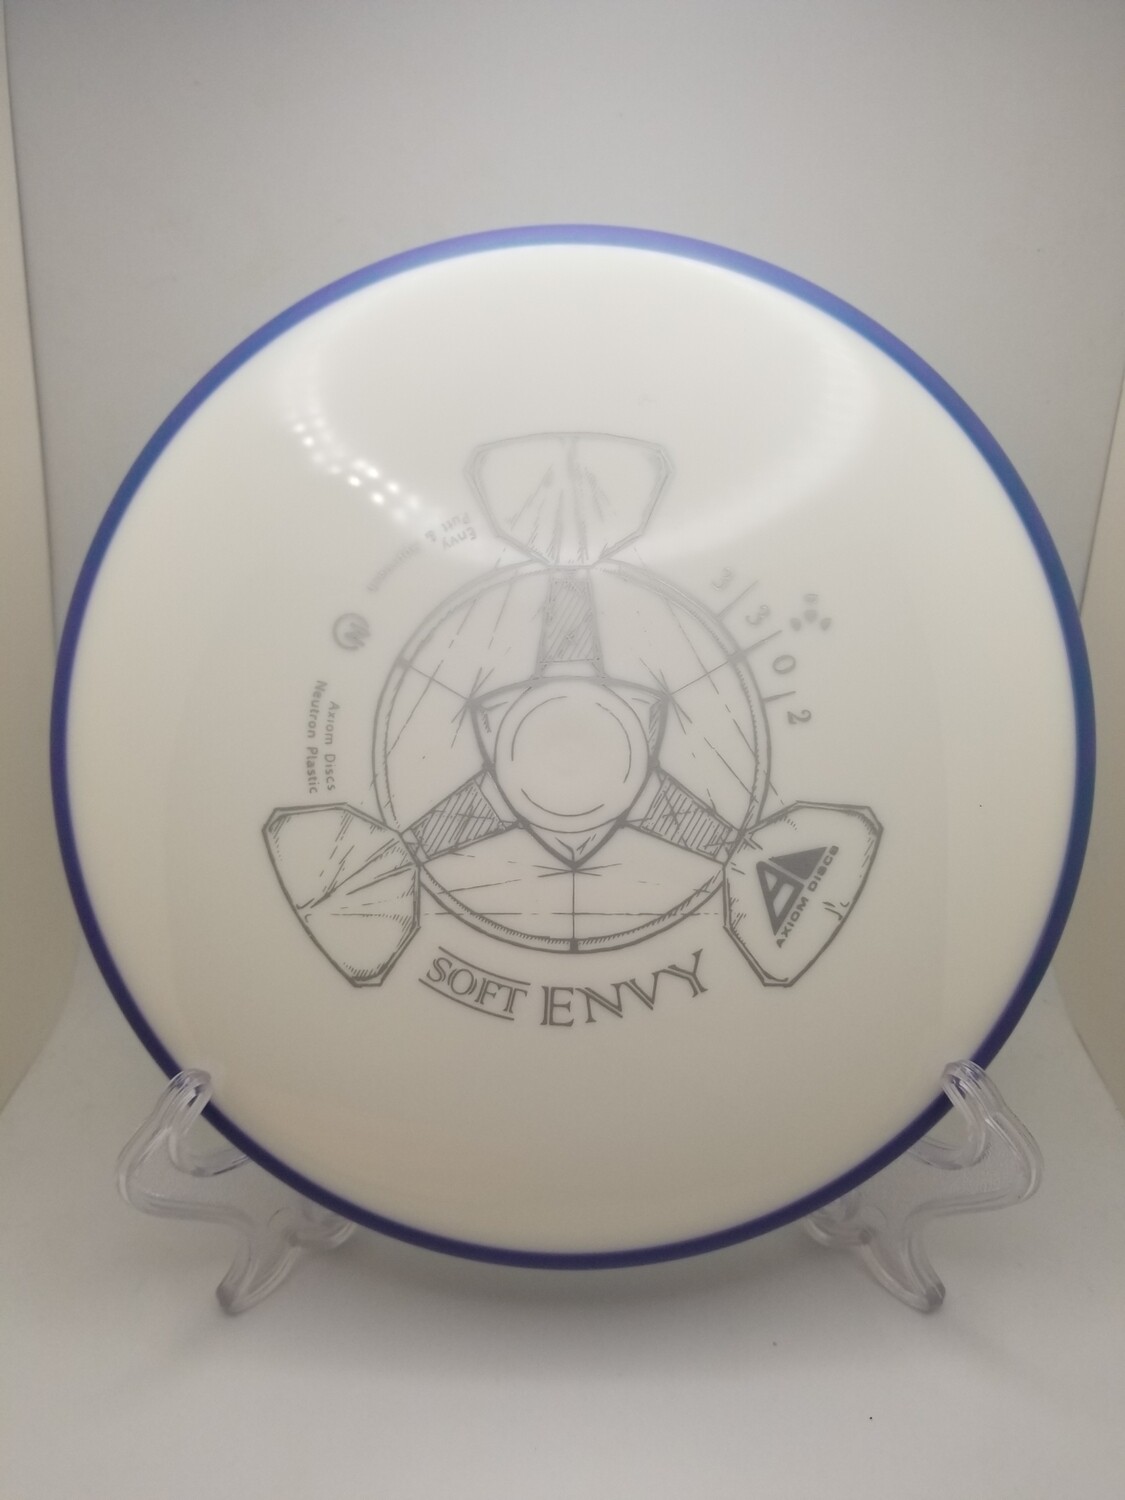 Axiom Discs Soft White Stamped with Colored Rim Neutron Envy 170-175g.